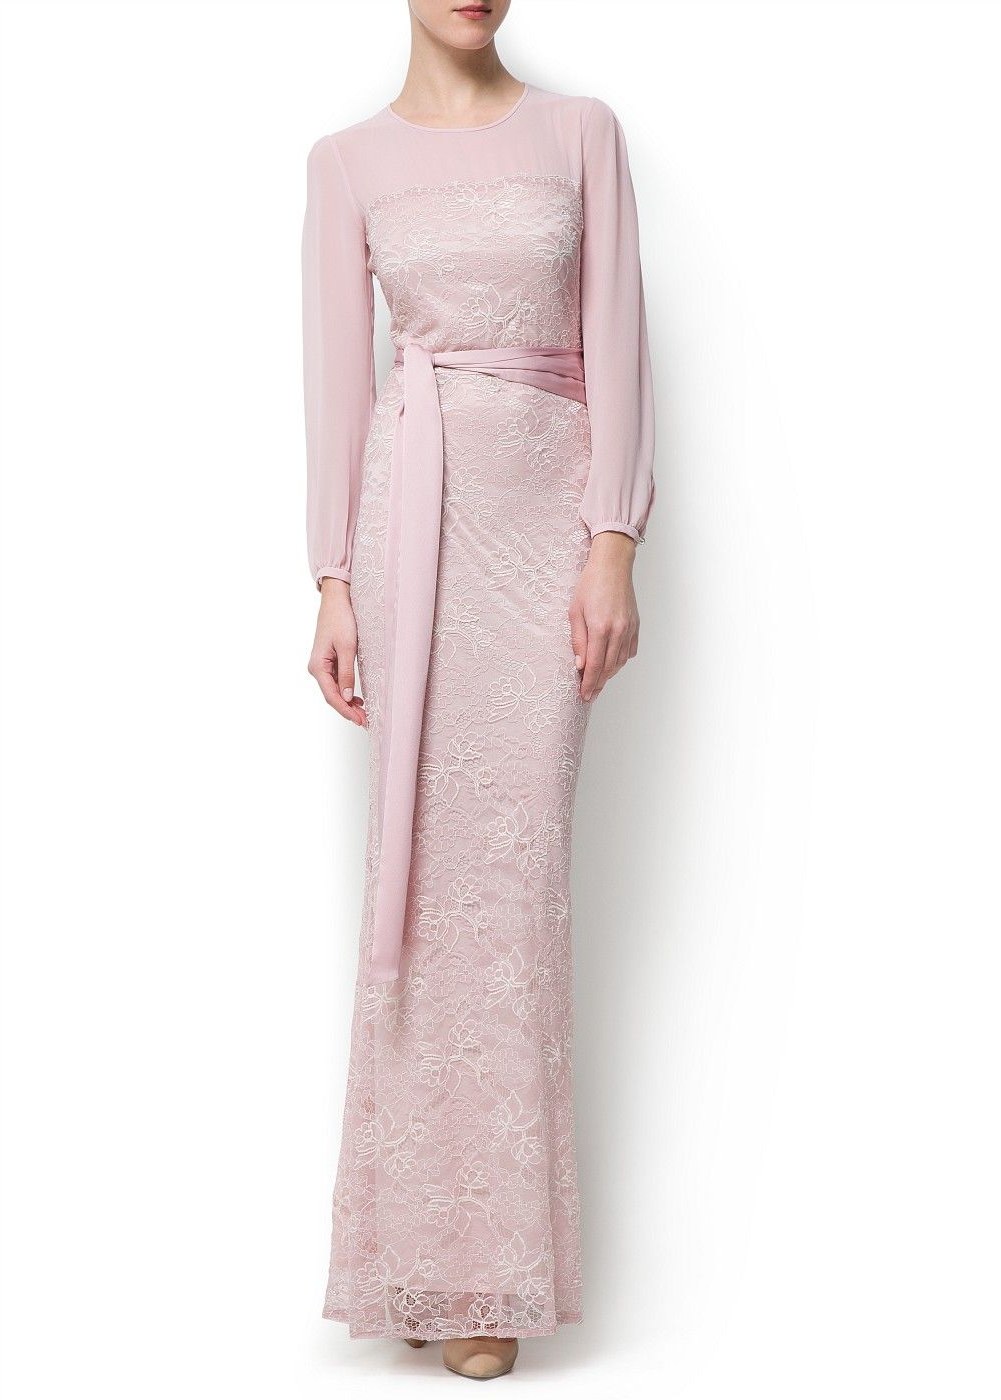 Bentuk Bridesmaid Hijab Pink E6d5 Lace Gown Woman In 2019